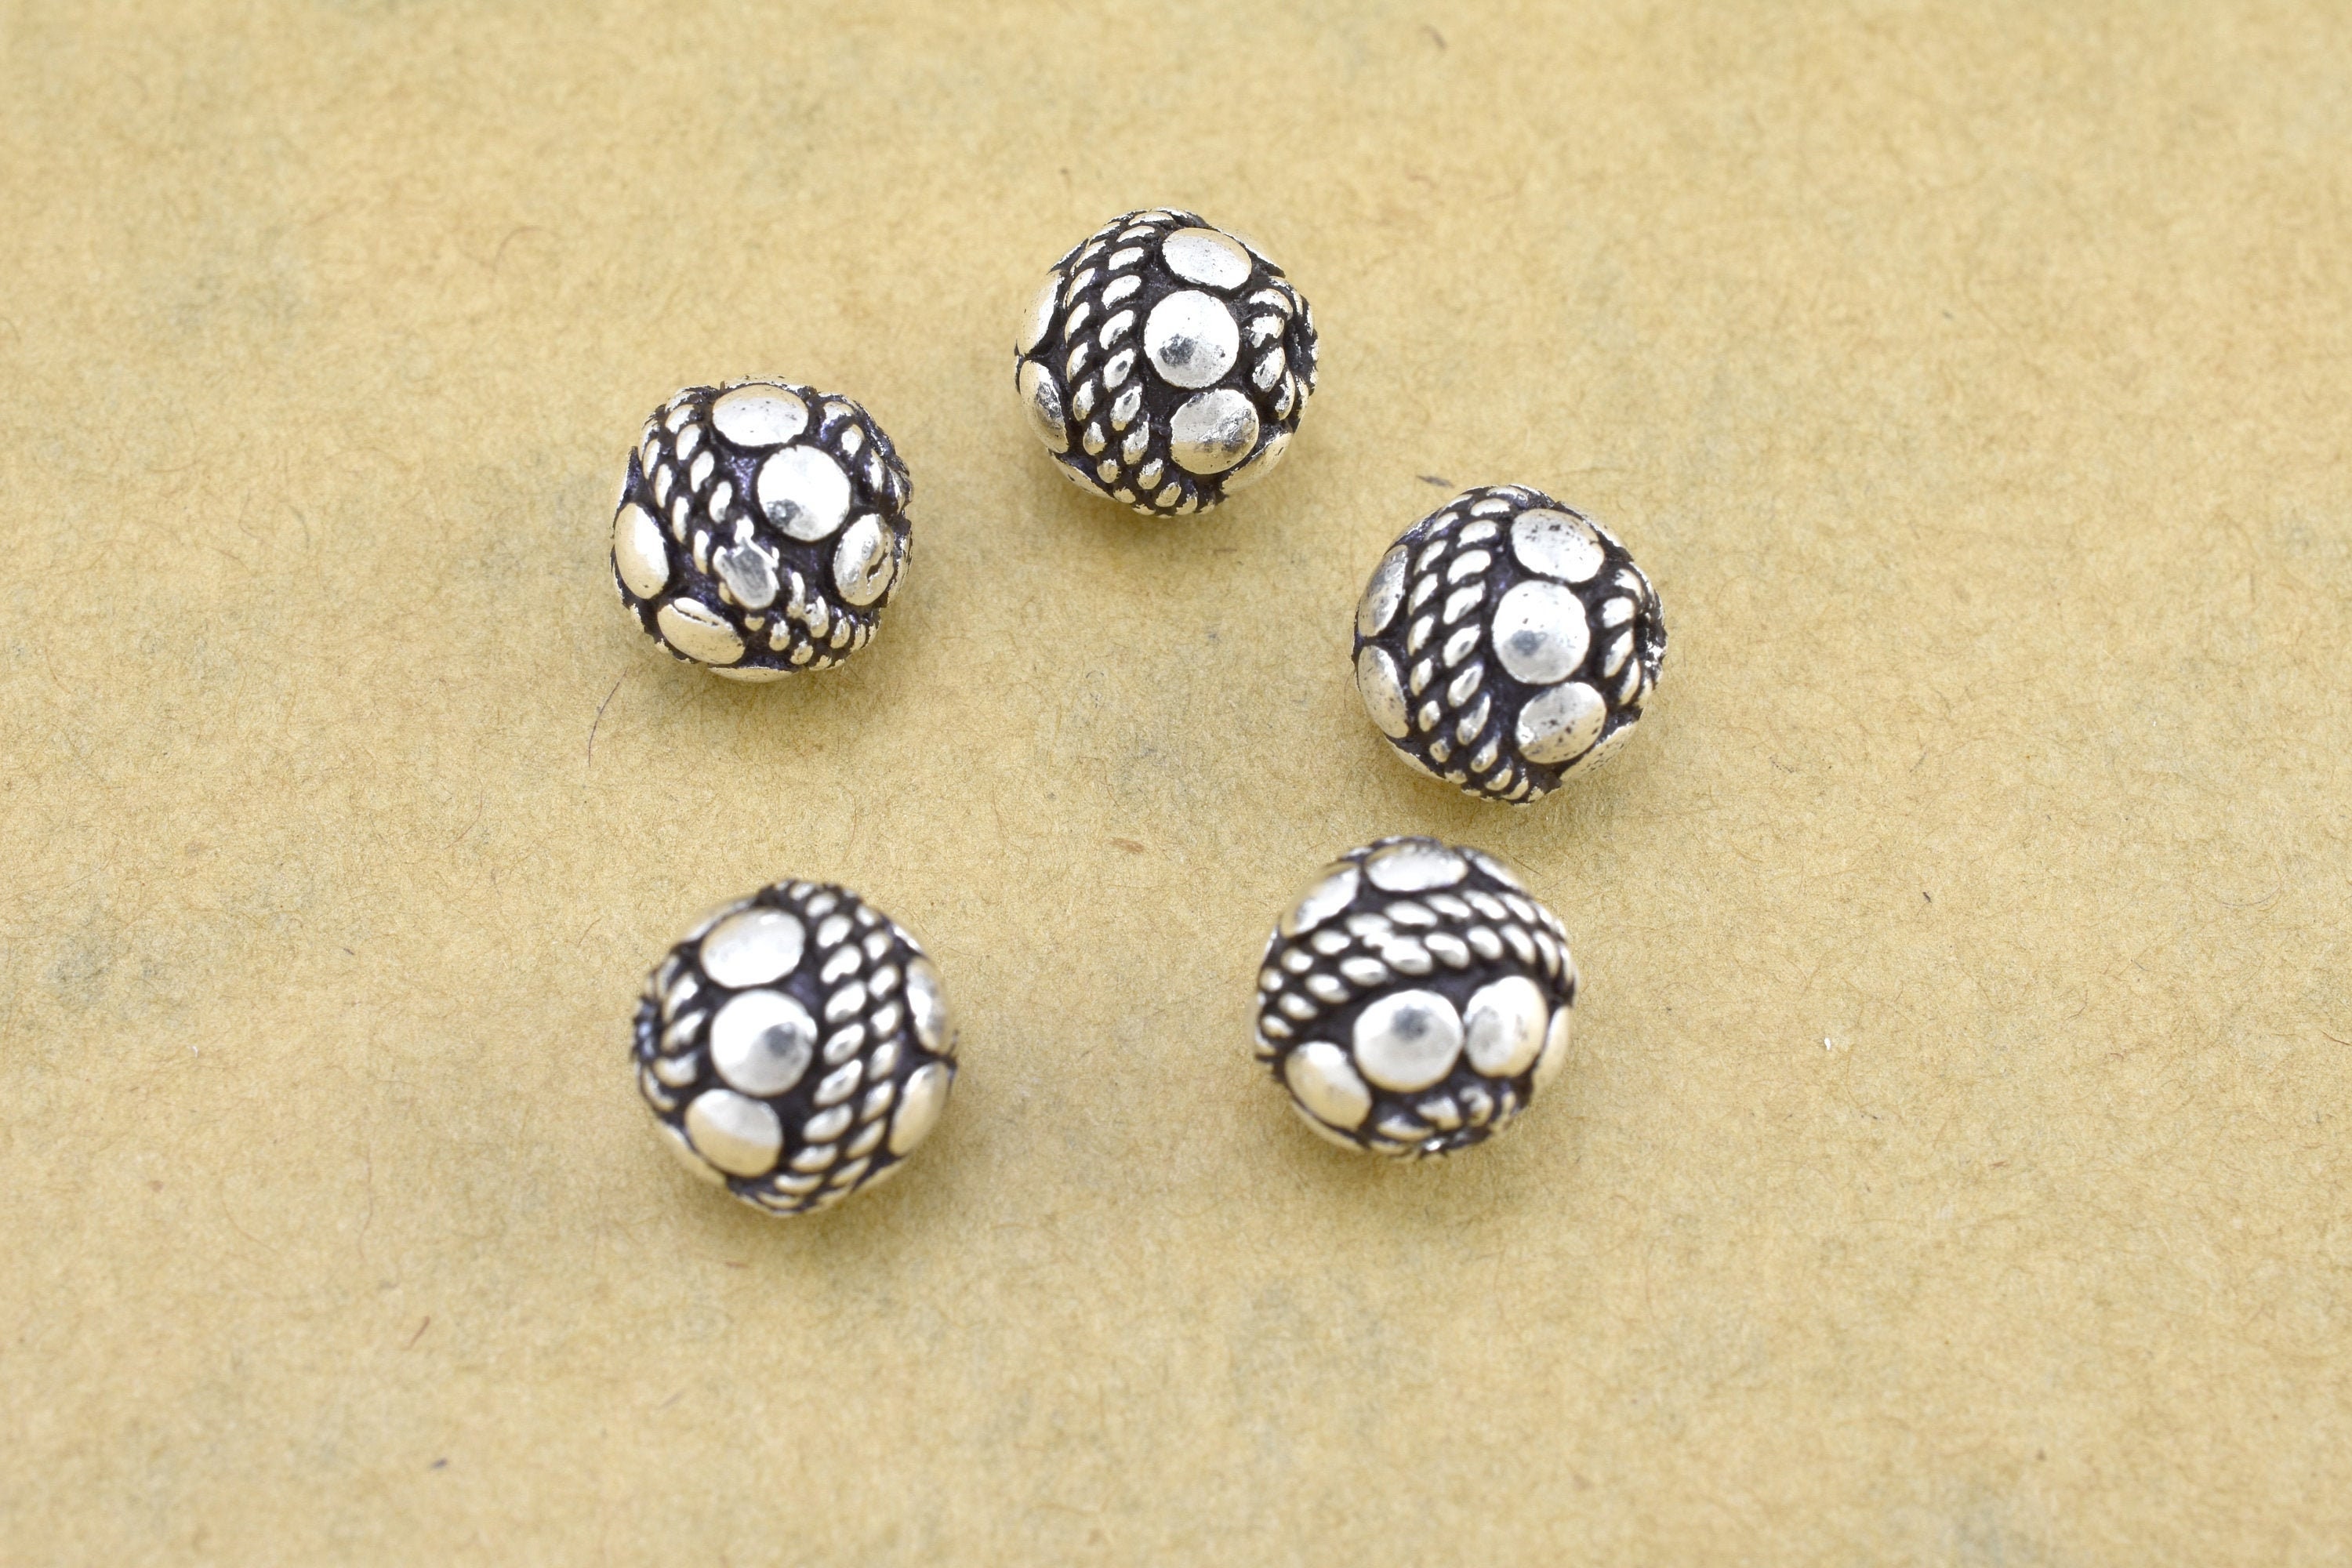 10mm 10pcs Silver Spacer Beads, Antique Silver Plated Bali Silver